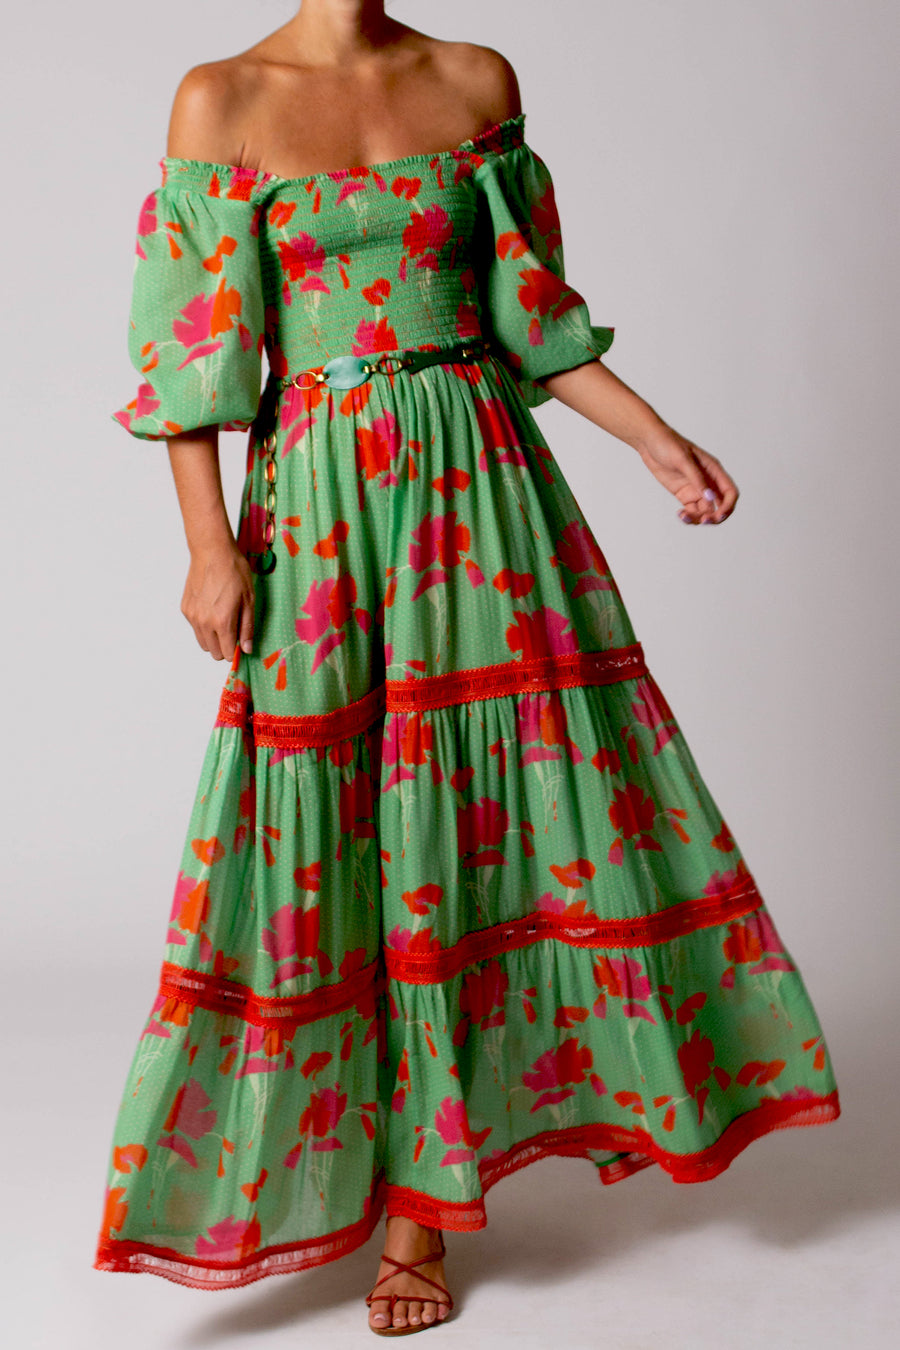 This is a photo of a woman wearing a green printed long dress.